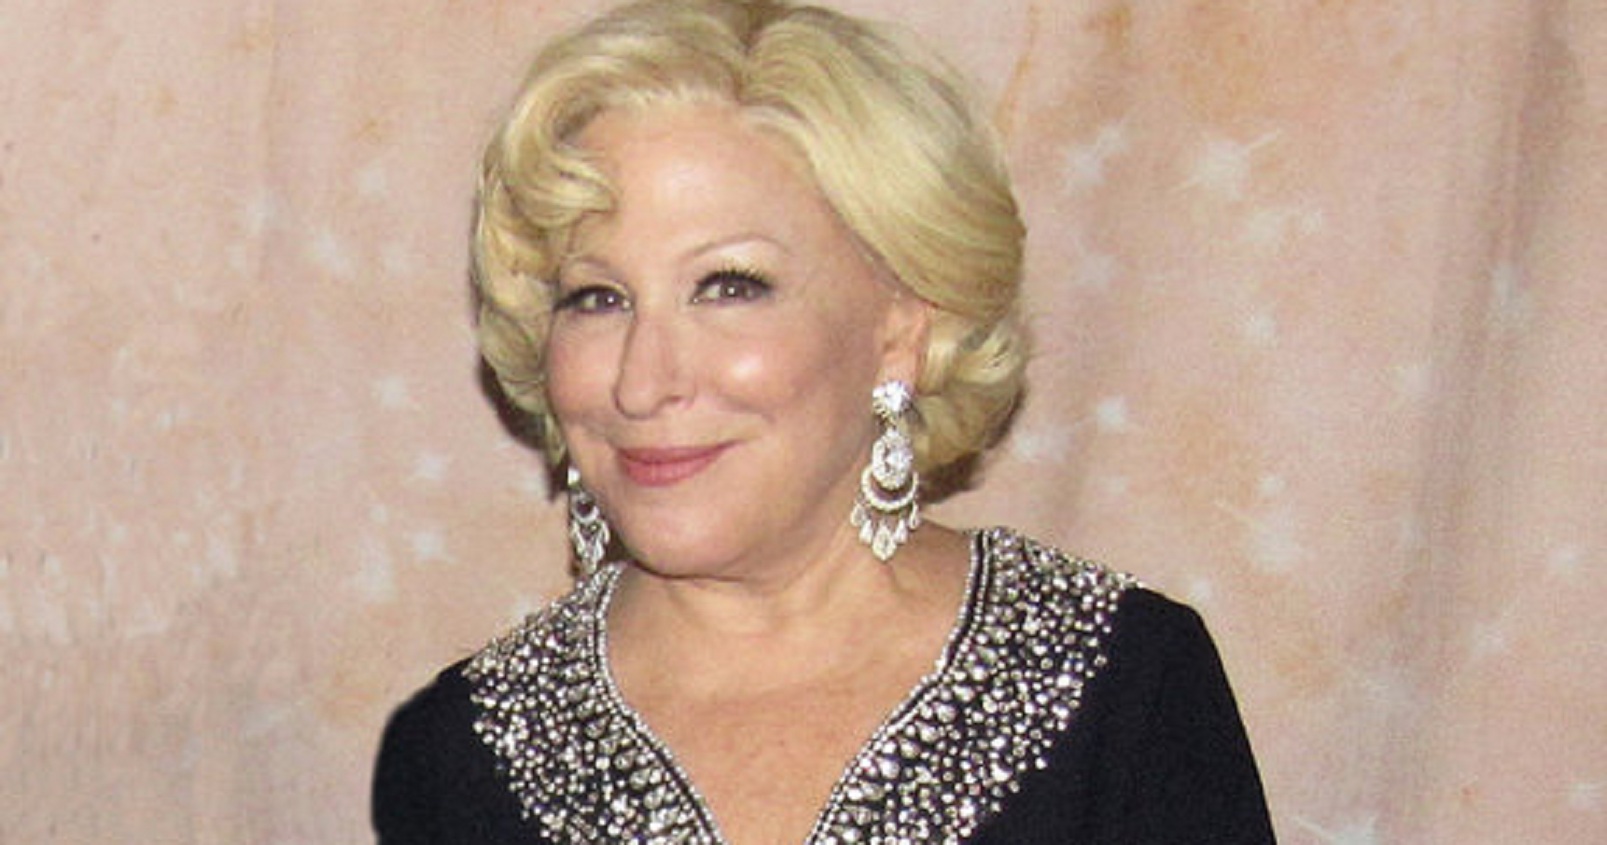 Bette Midler: “Women are the N-word of the world”